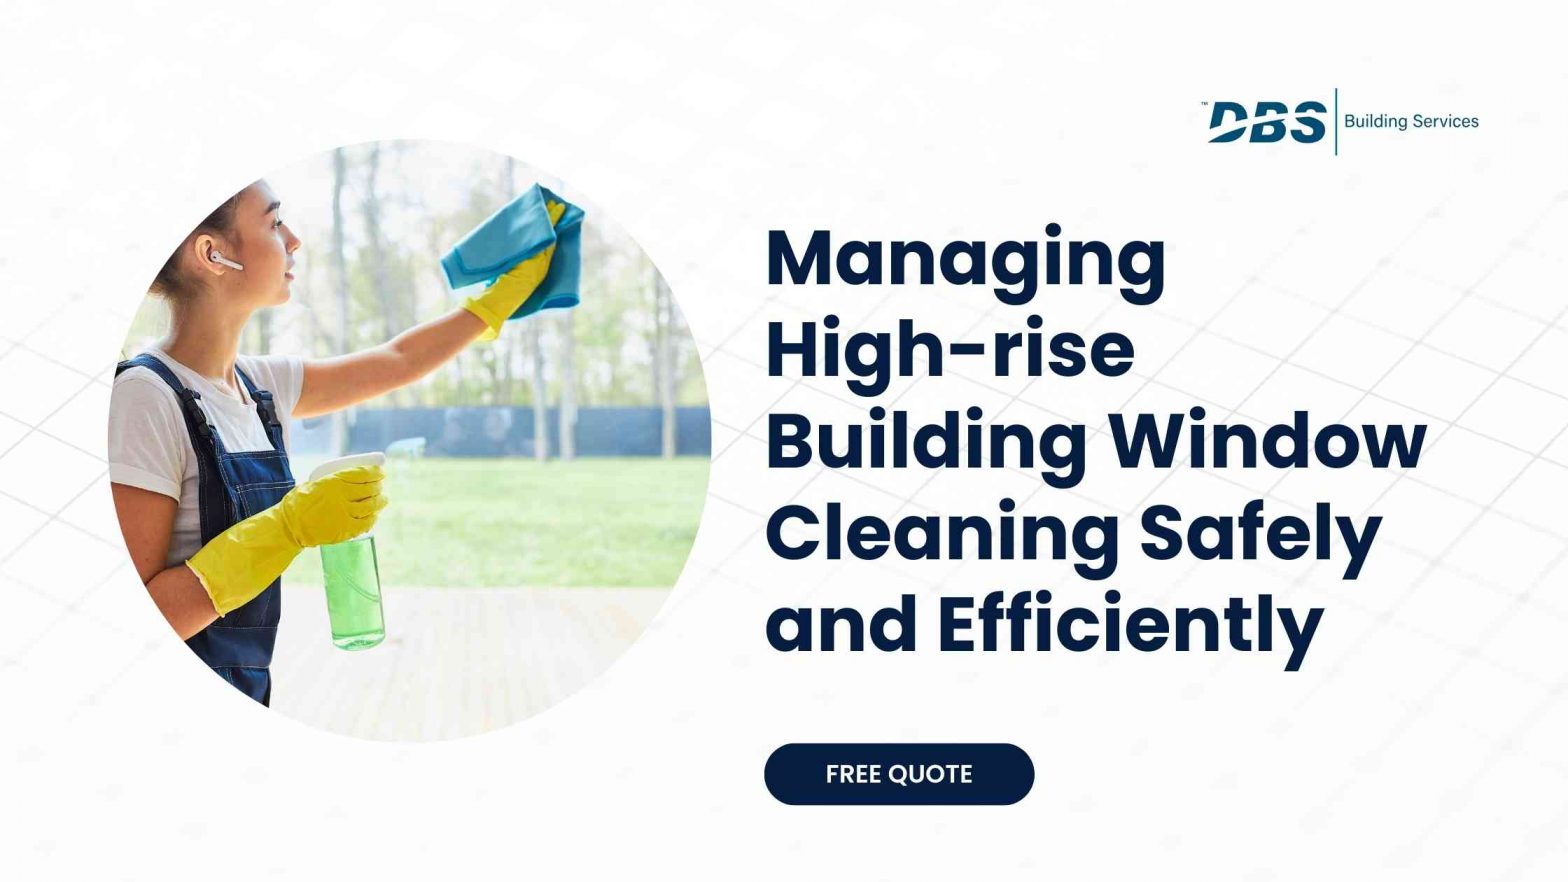 High-rise Building Window Cleaning